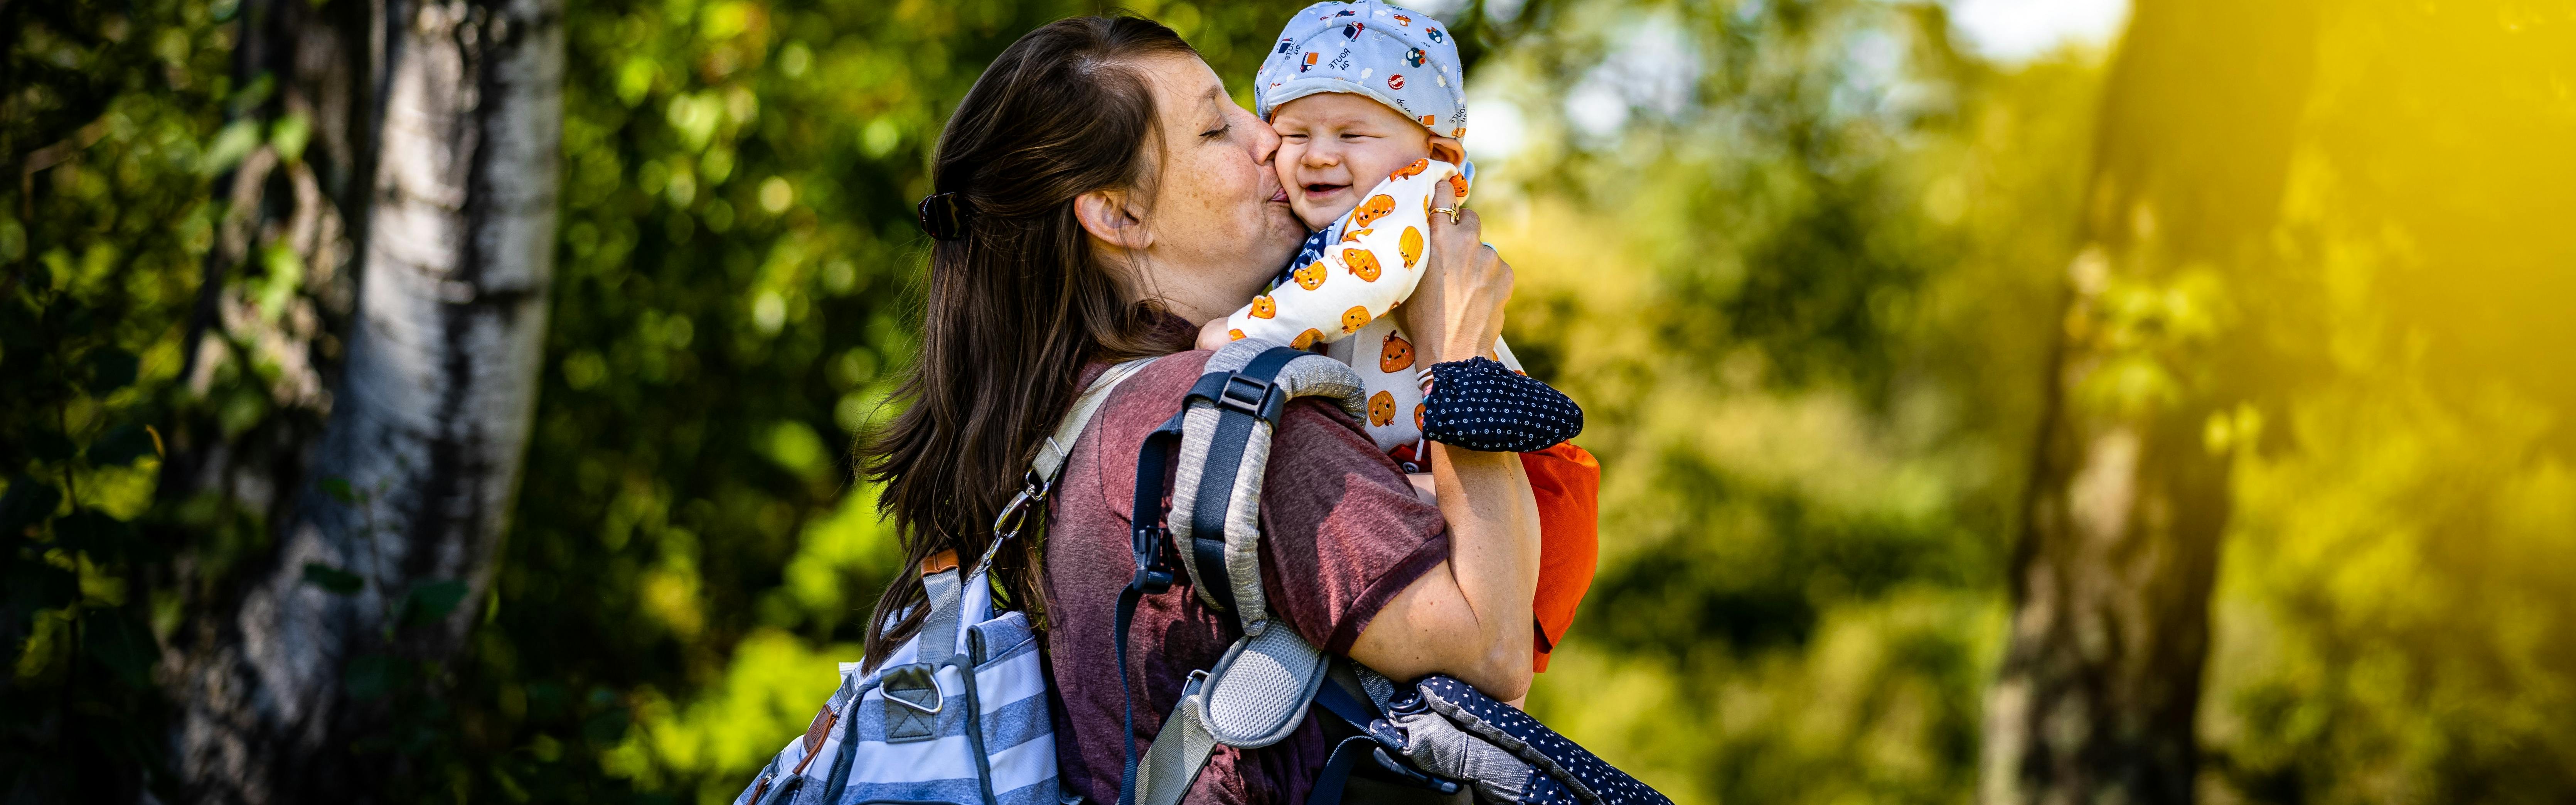 A woman kissing her baby. She has a backpack, diaper bag, and baby carrier on her shoulder.